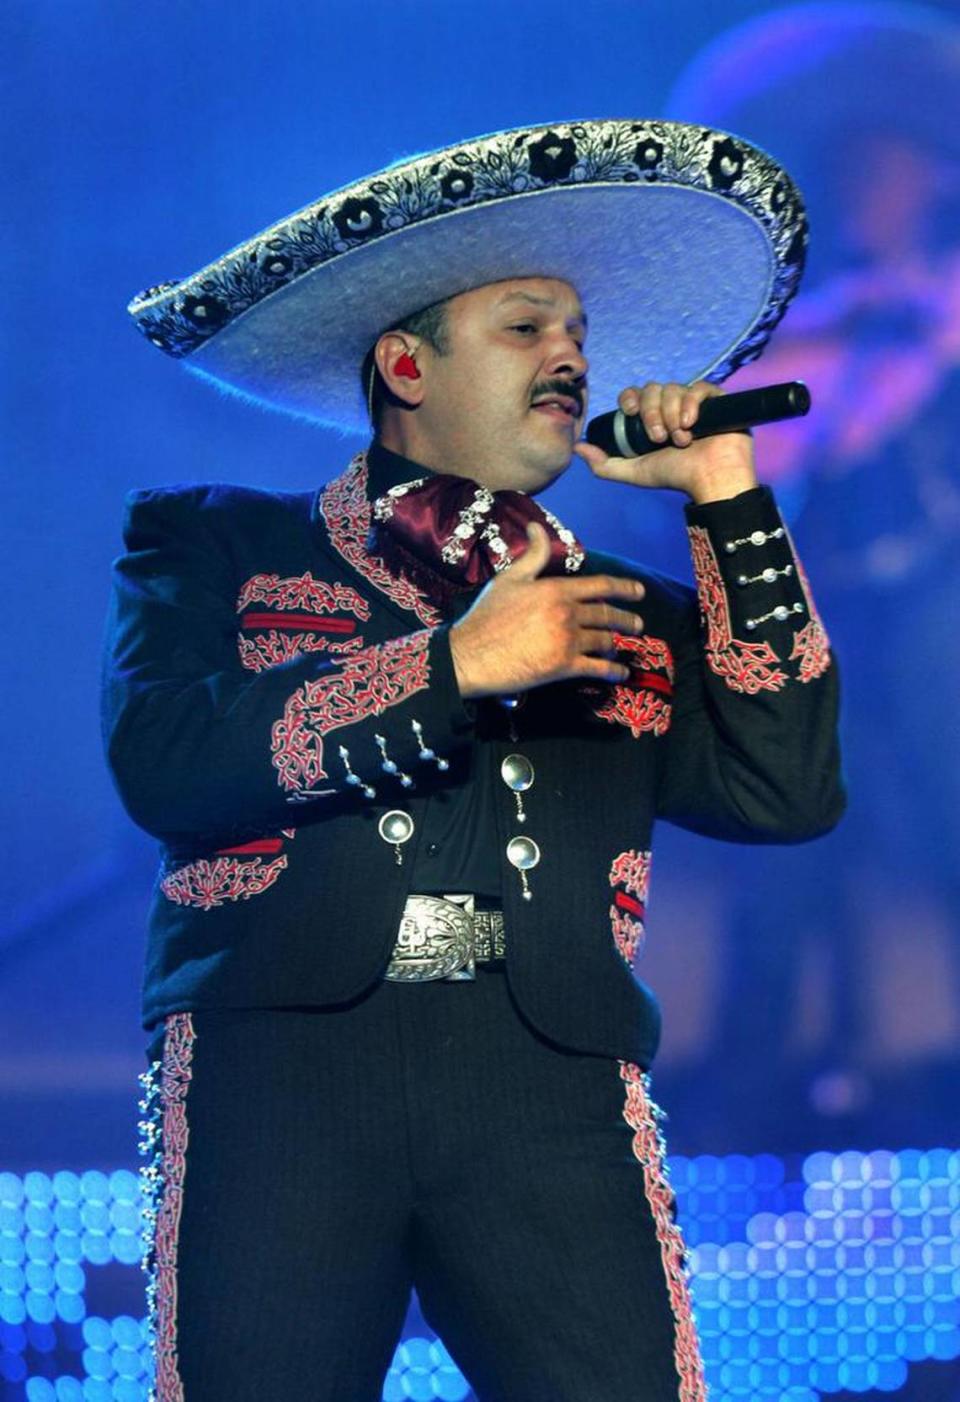 Pepe Aguilar performed at Stockton Arena in October 2003.